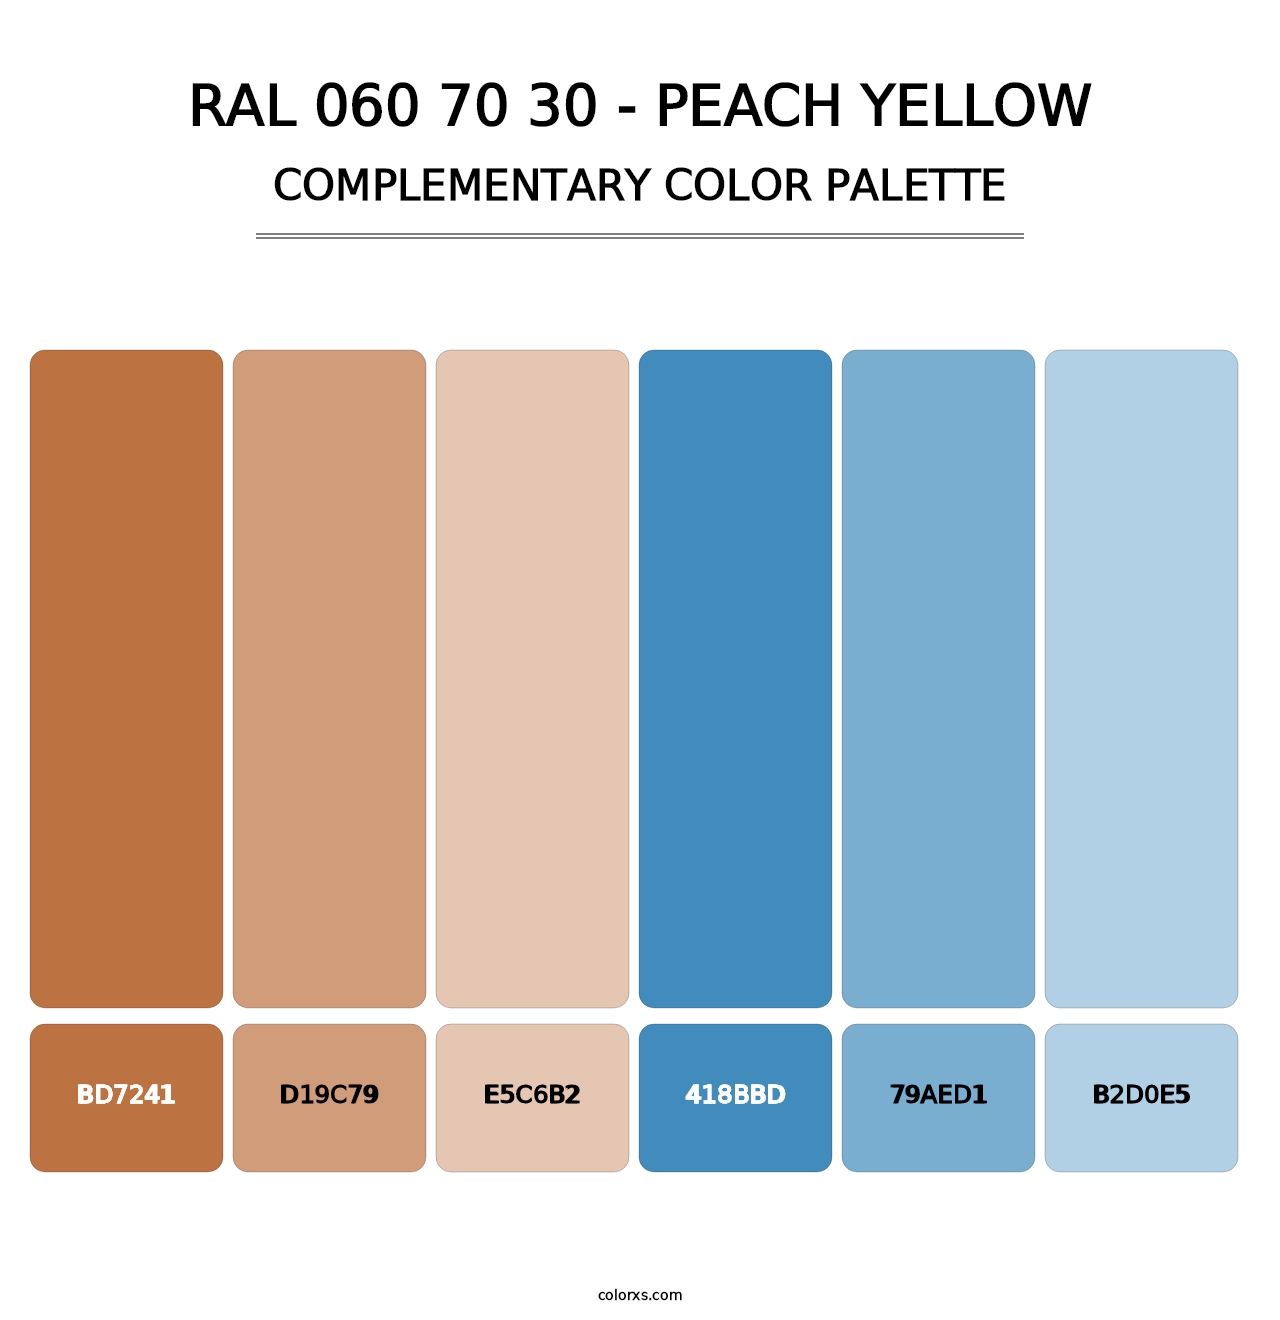 RAL 060 70 30 - Peach Yellow - Complementary Color Palette